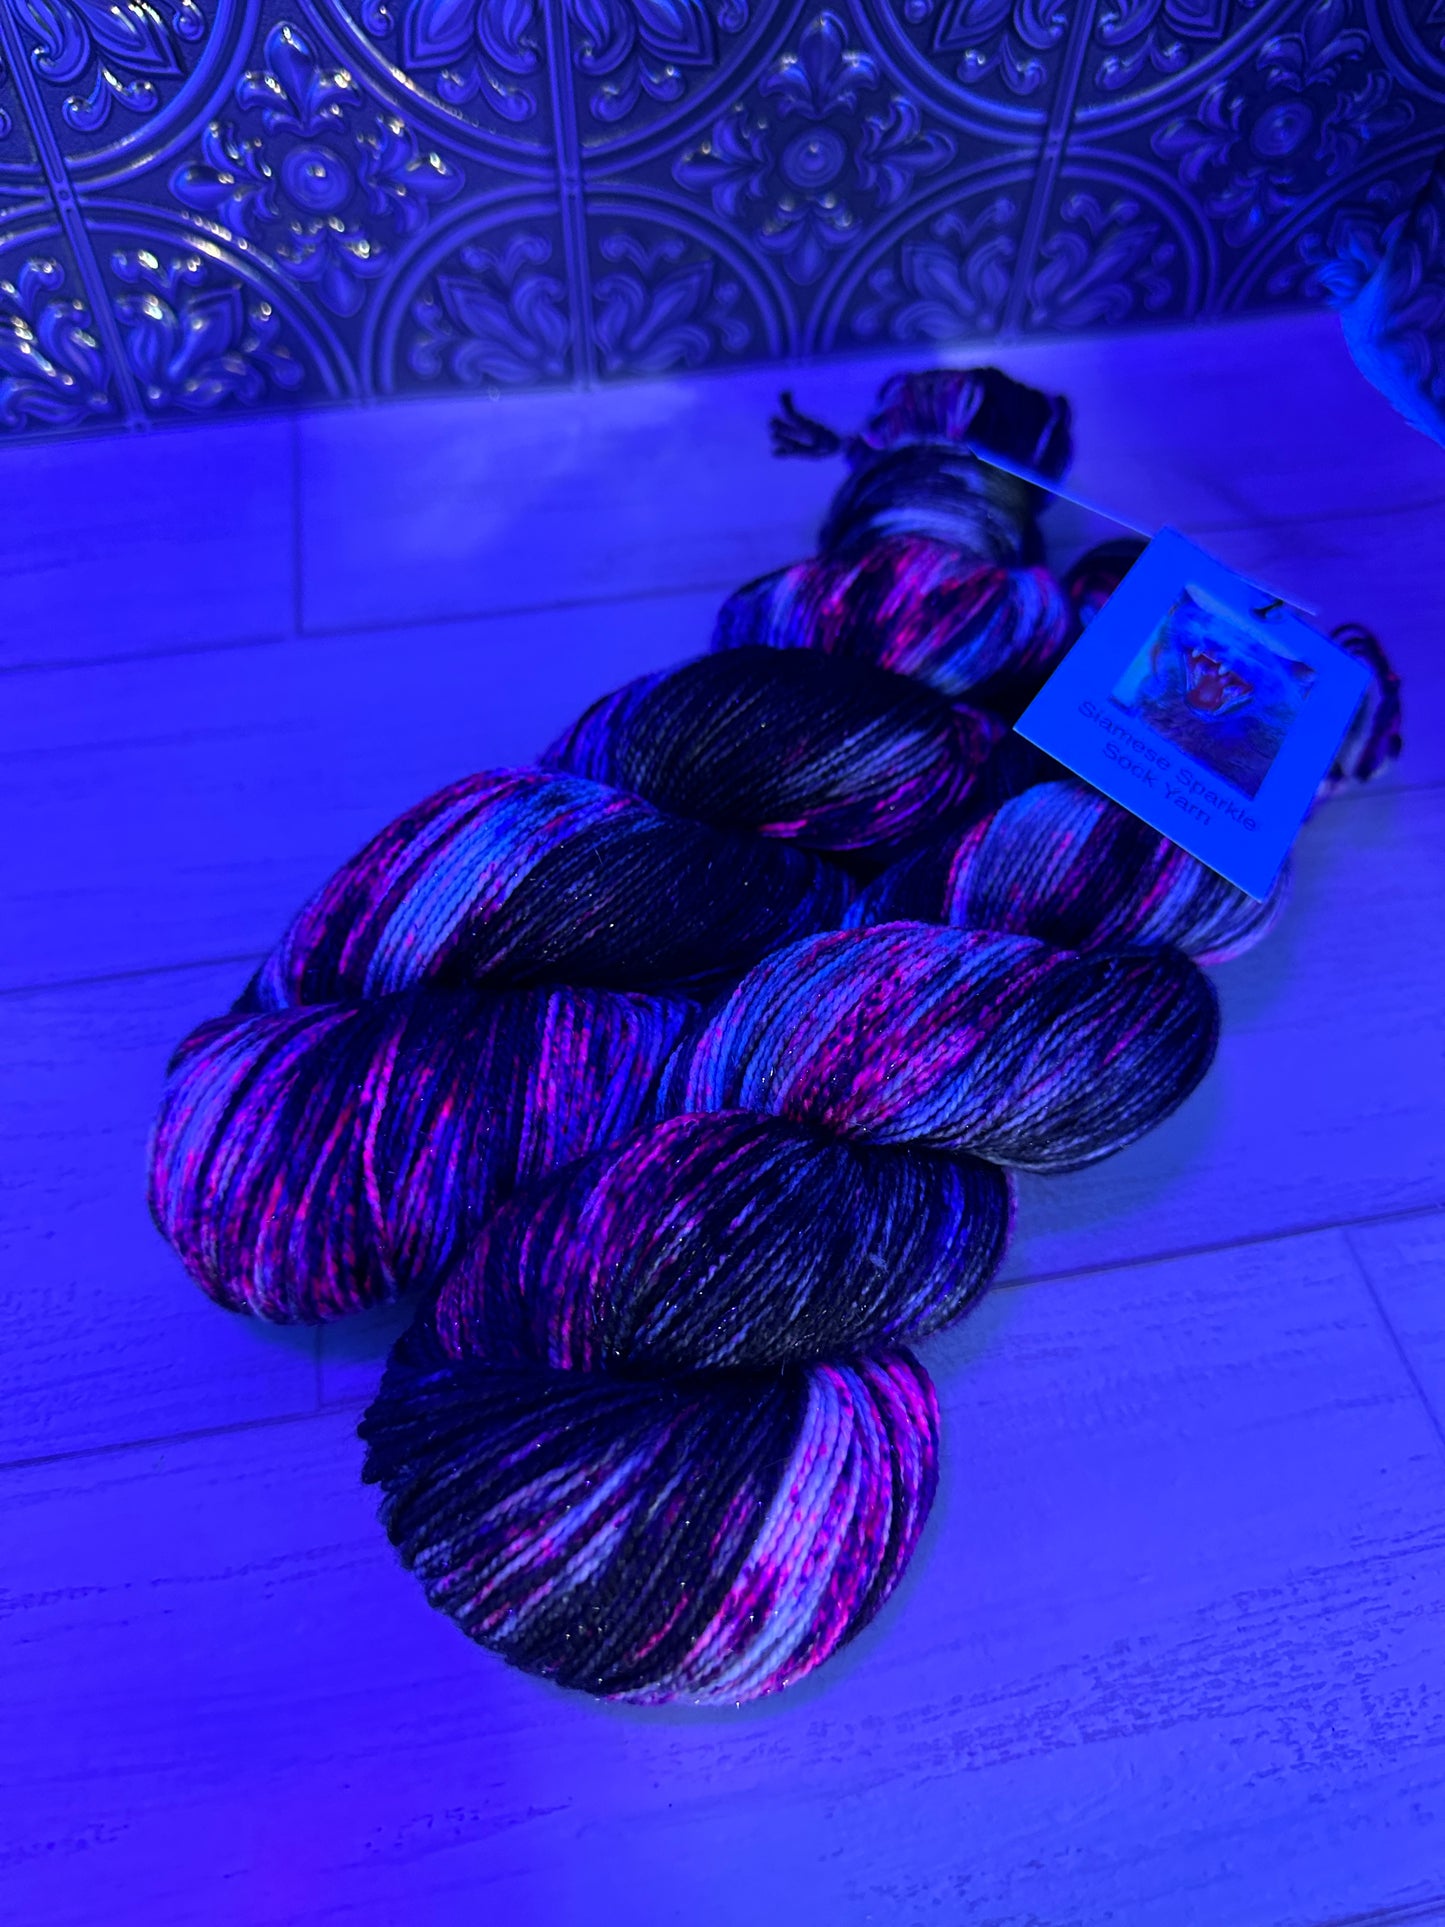 "Space Dust" on Various Yarn Bases